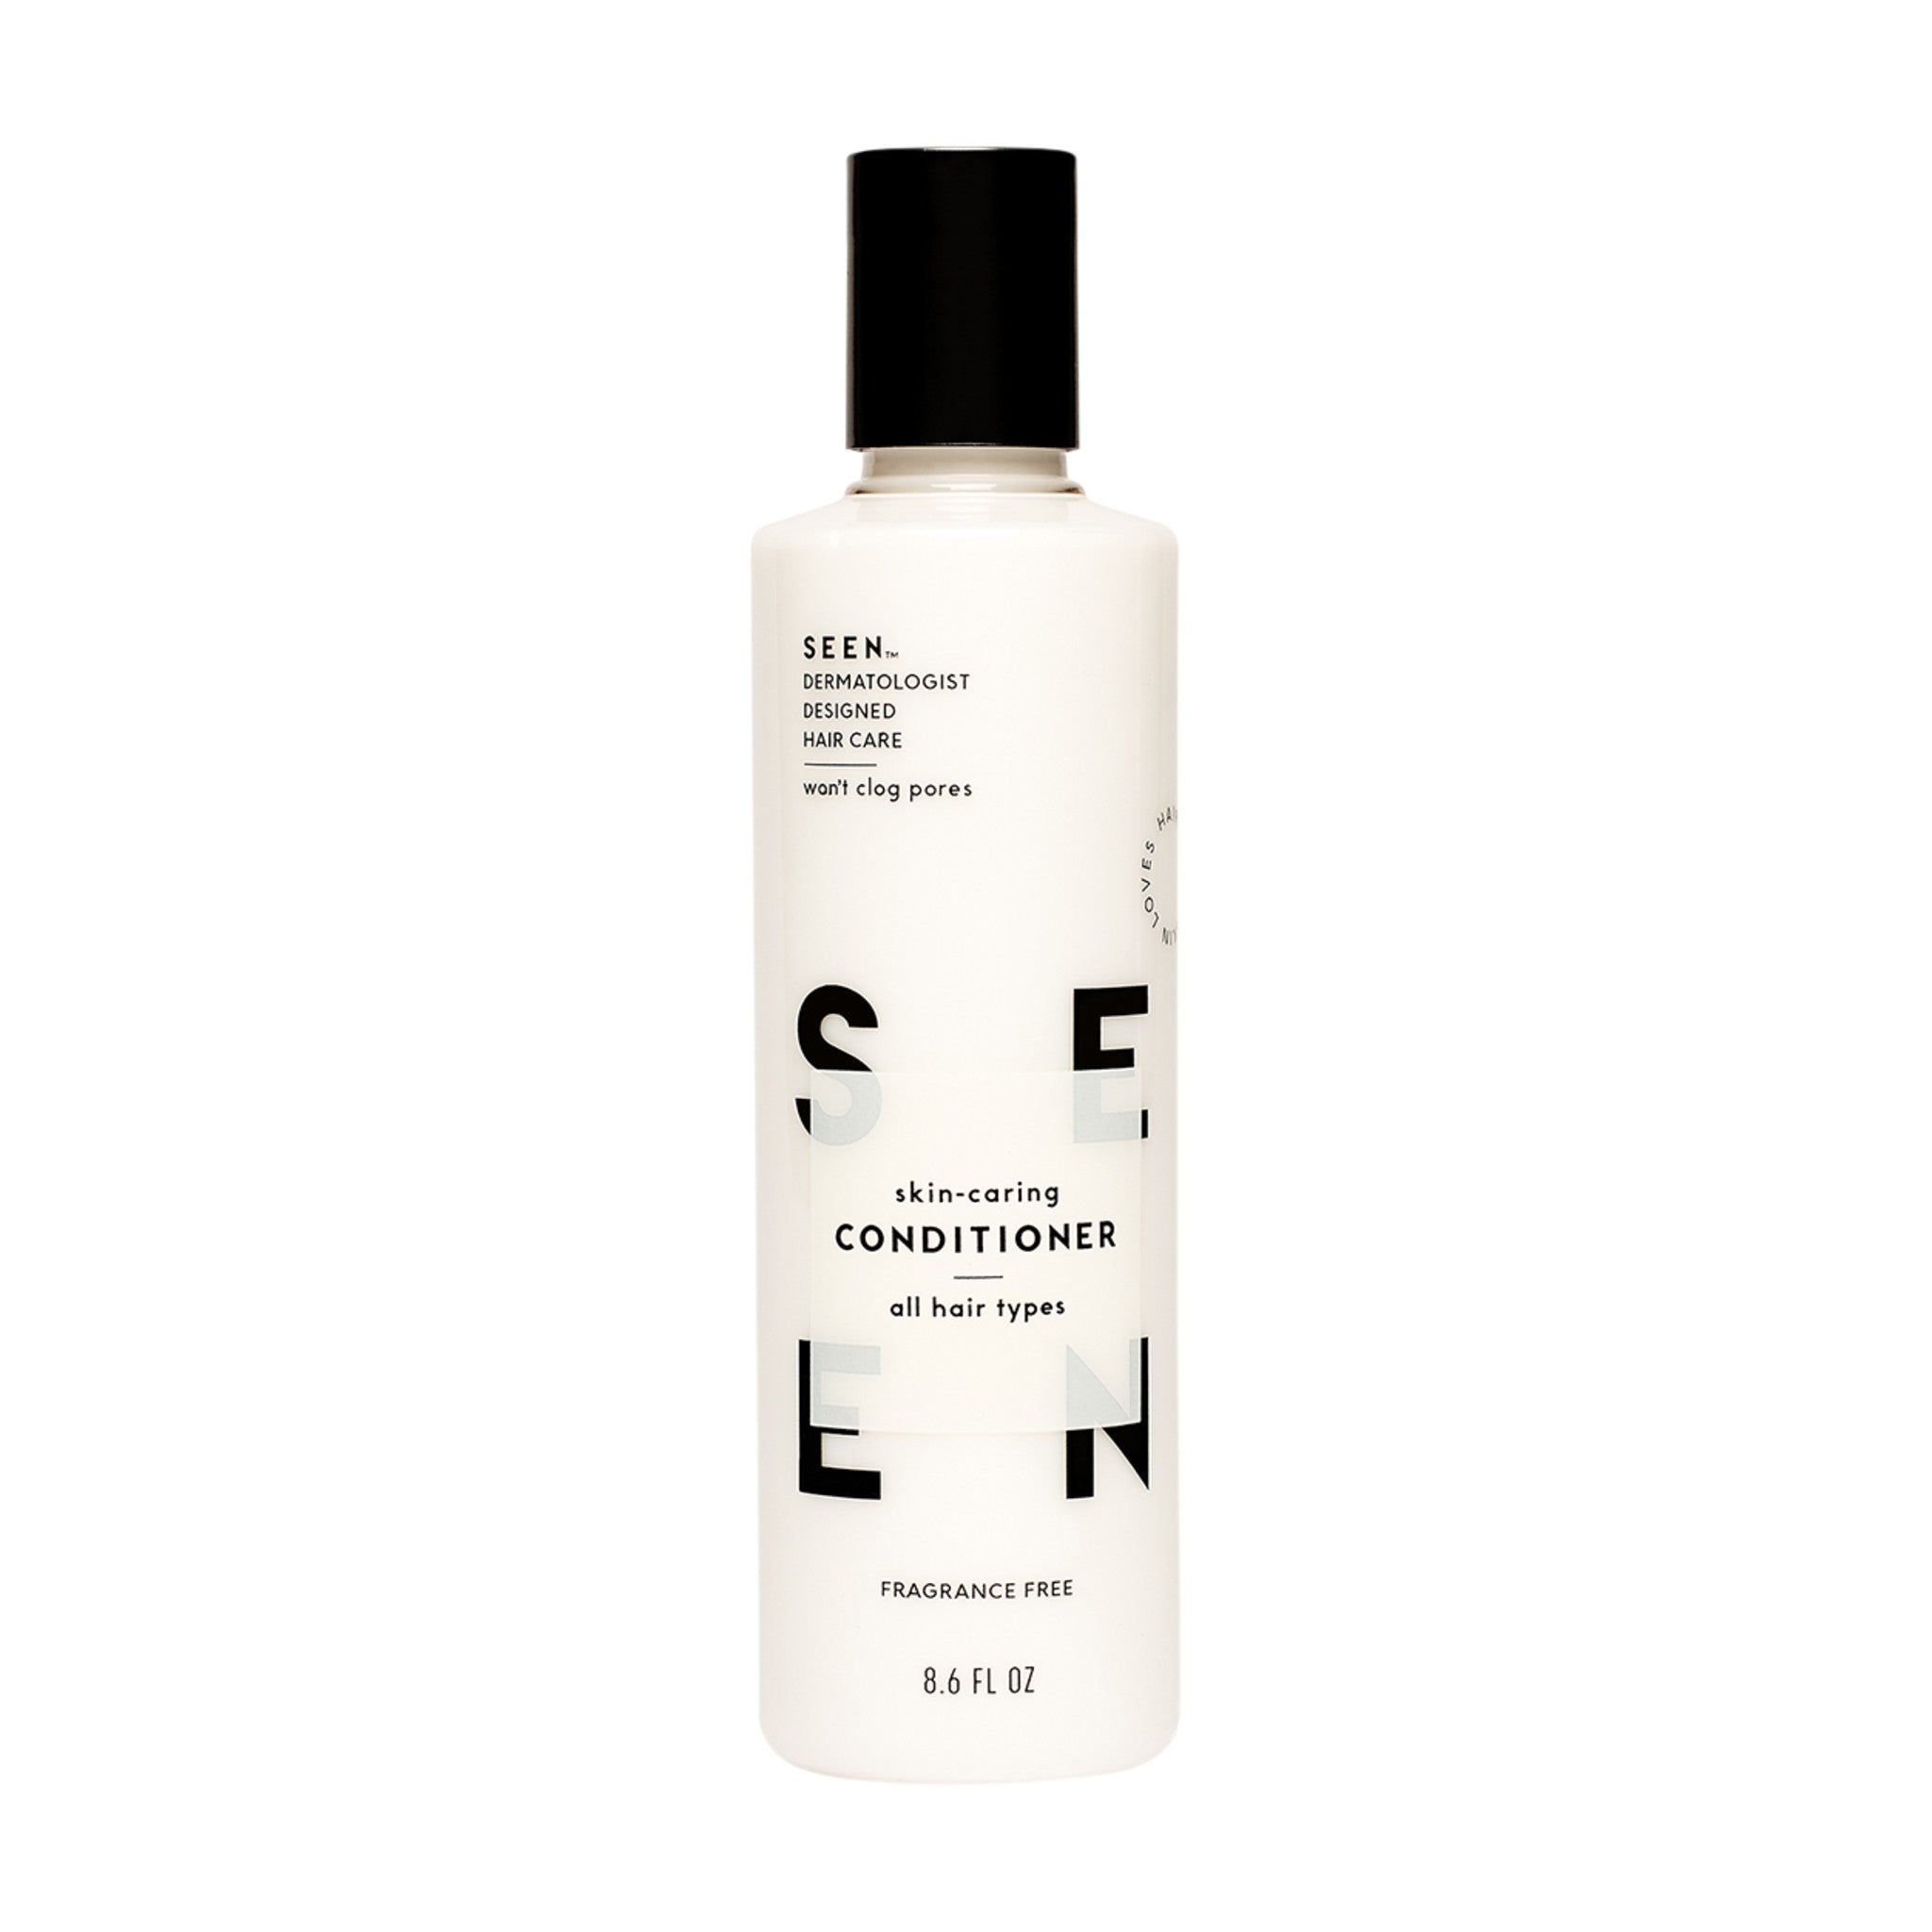 Seen Conditioner Fragrance-Free Size variant: 8.6 fl oz main image.